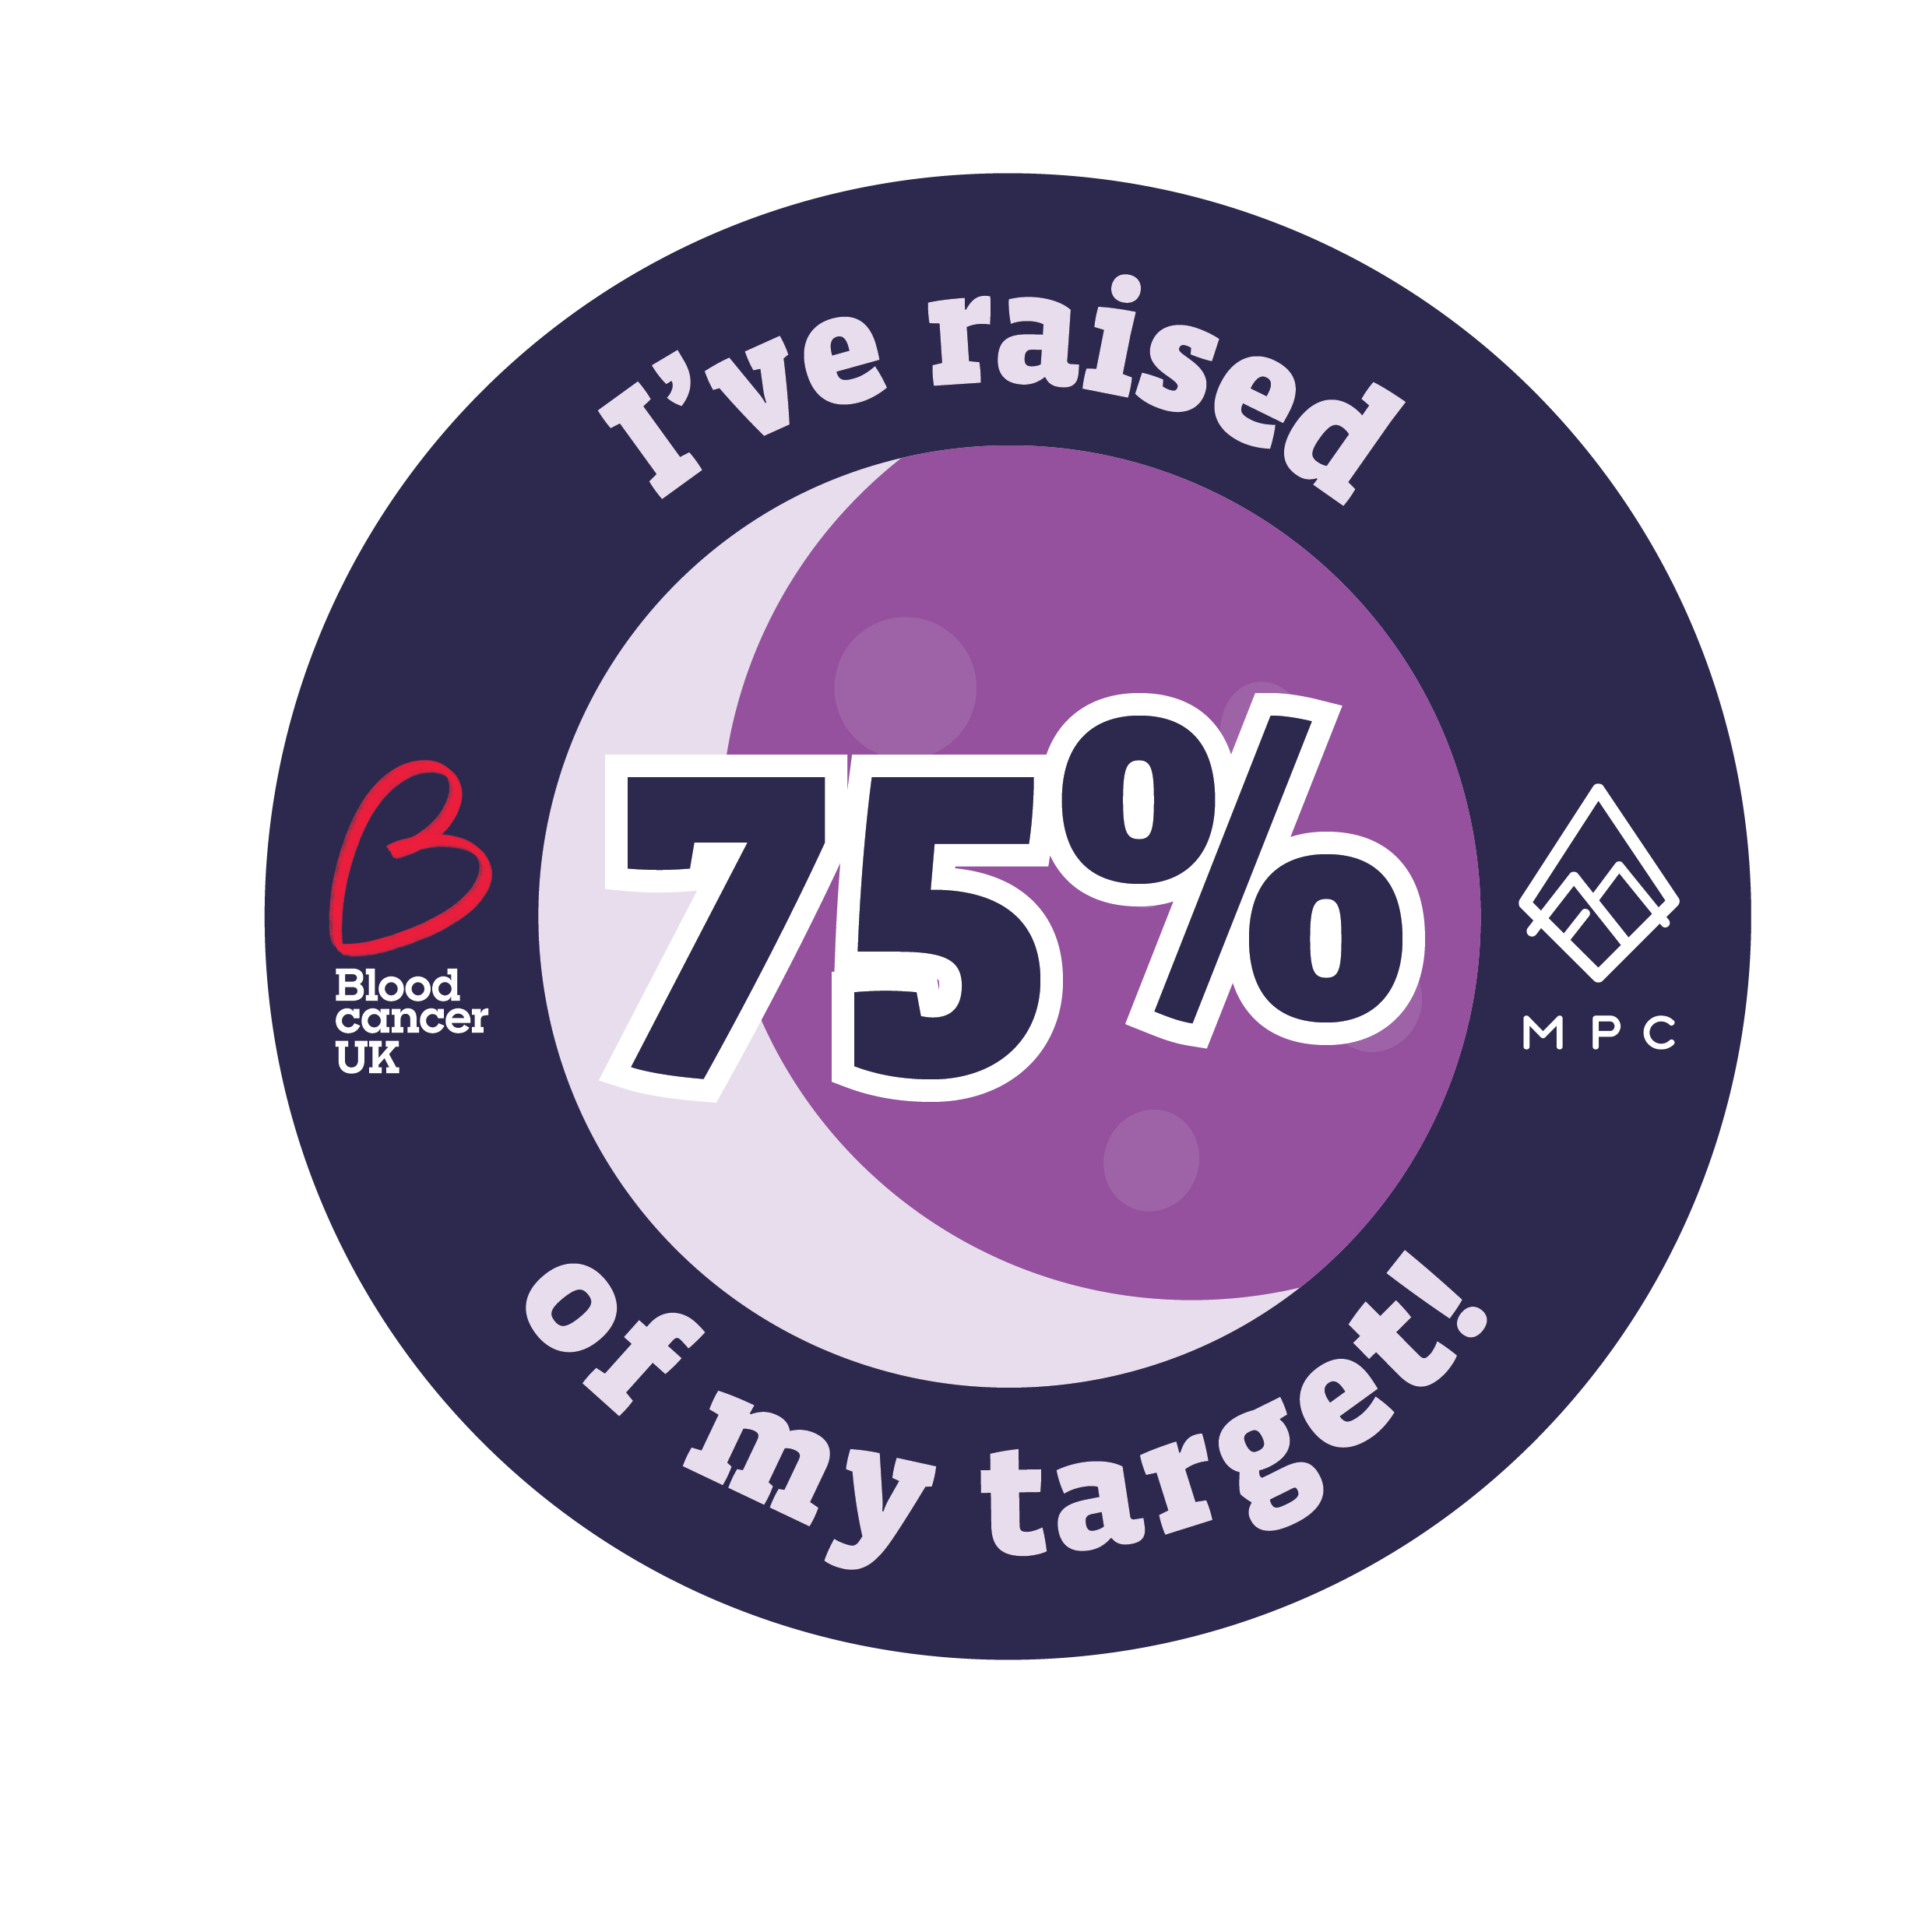 Raise 75% of your target